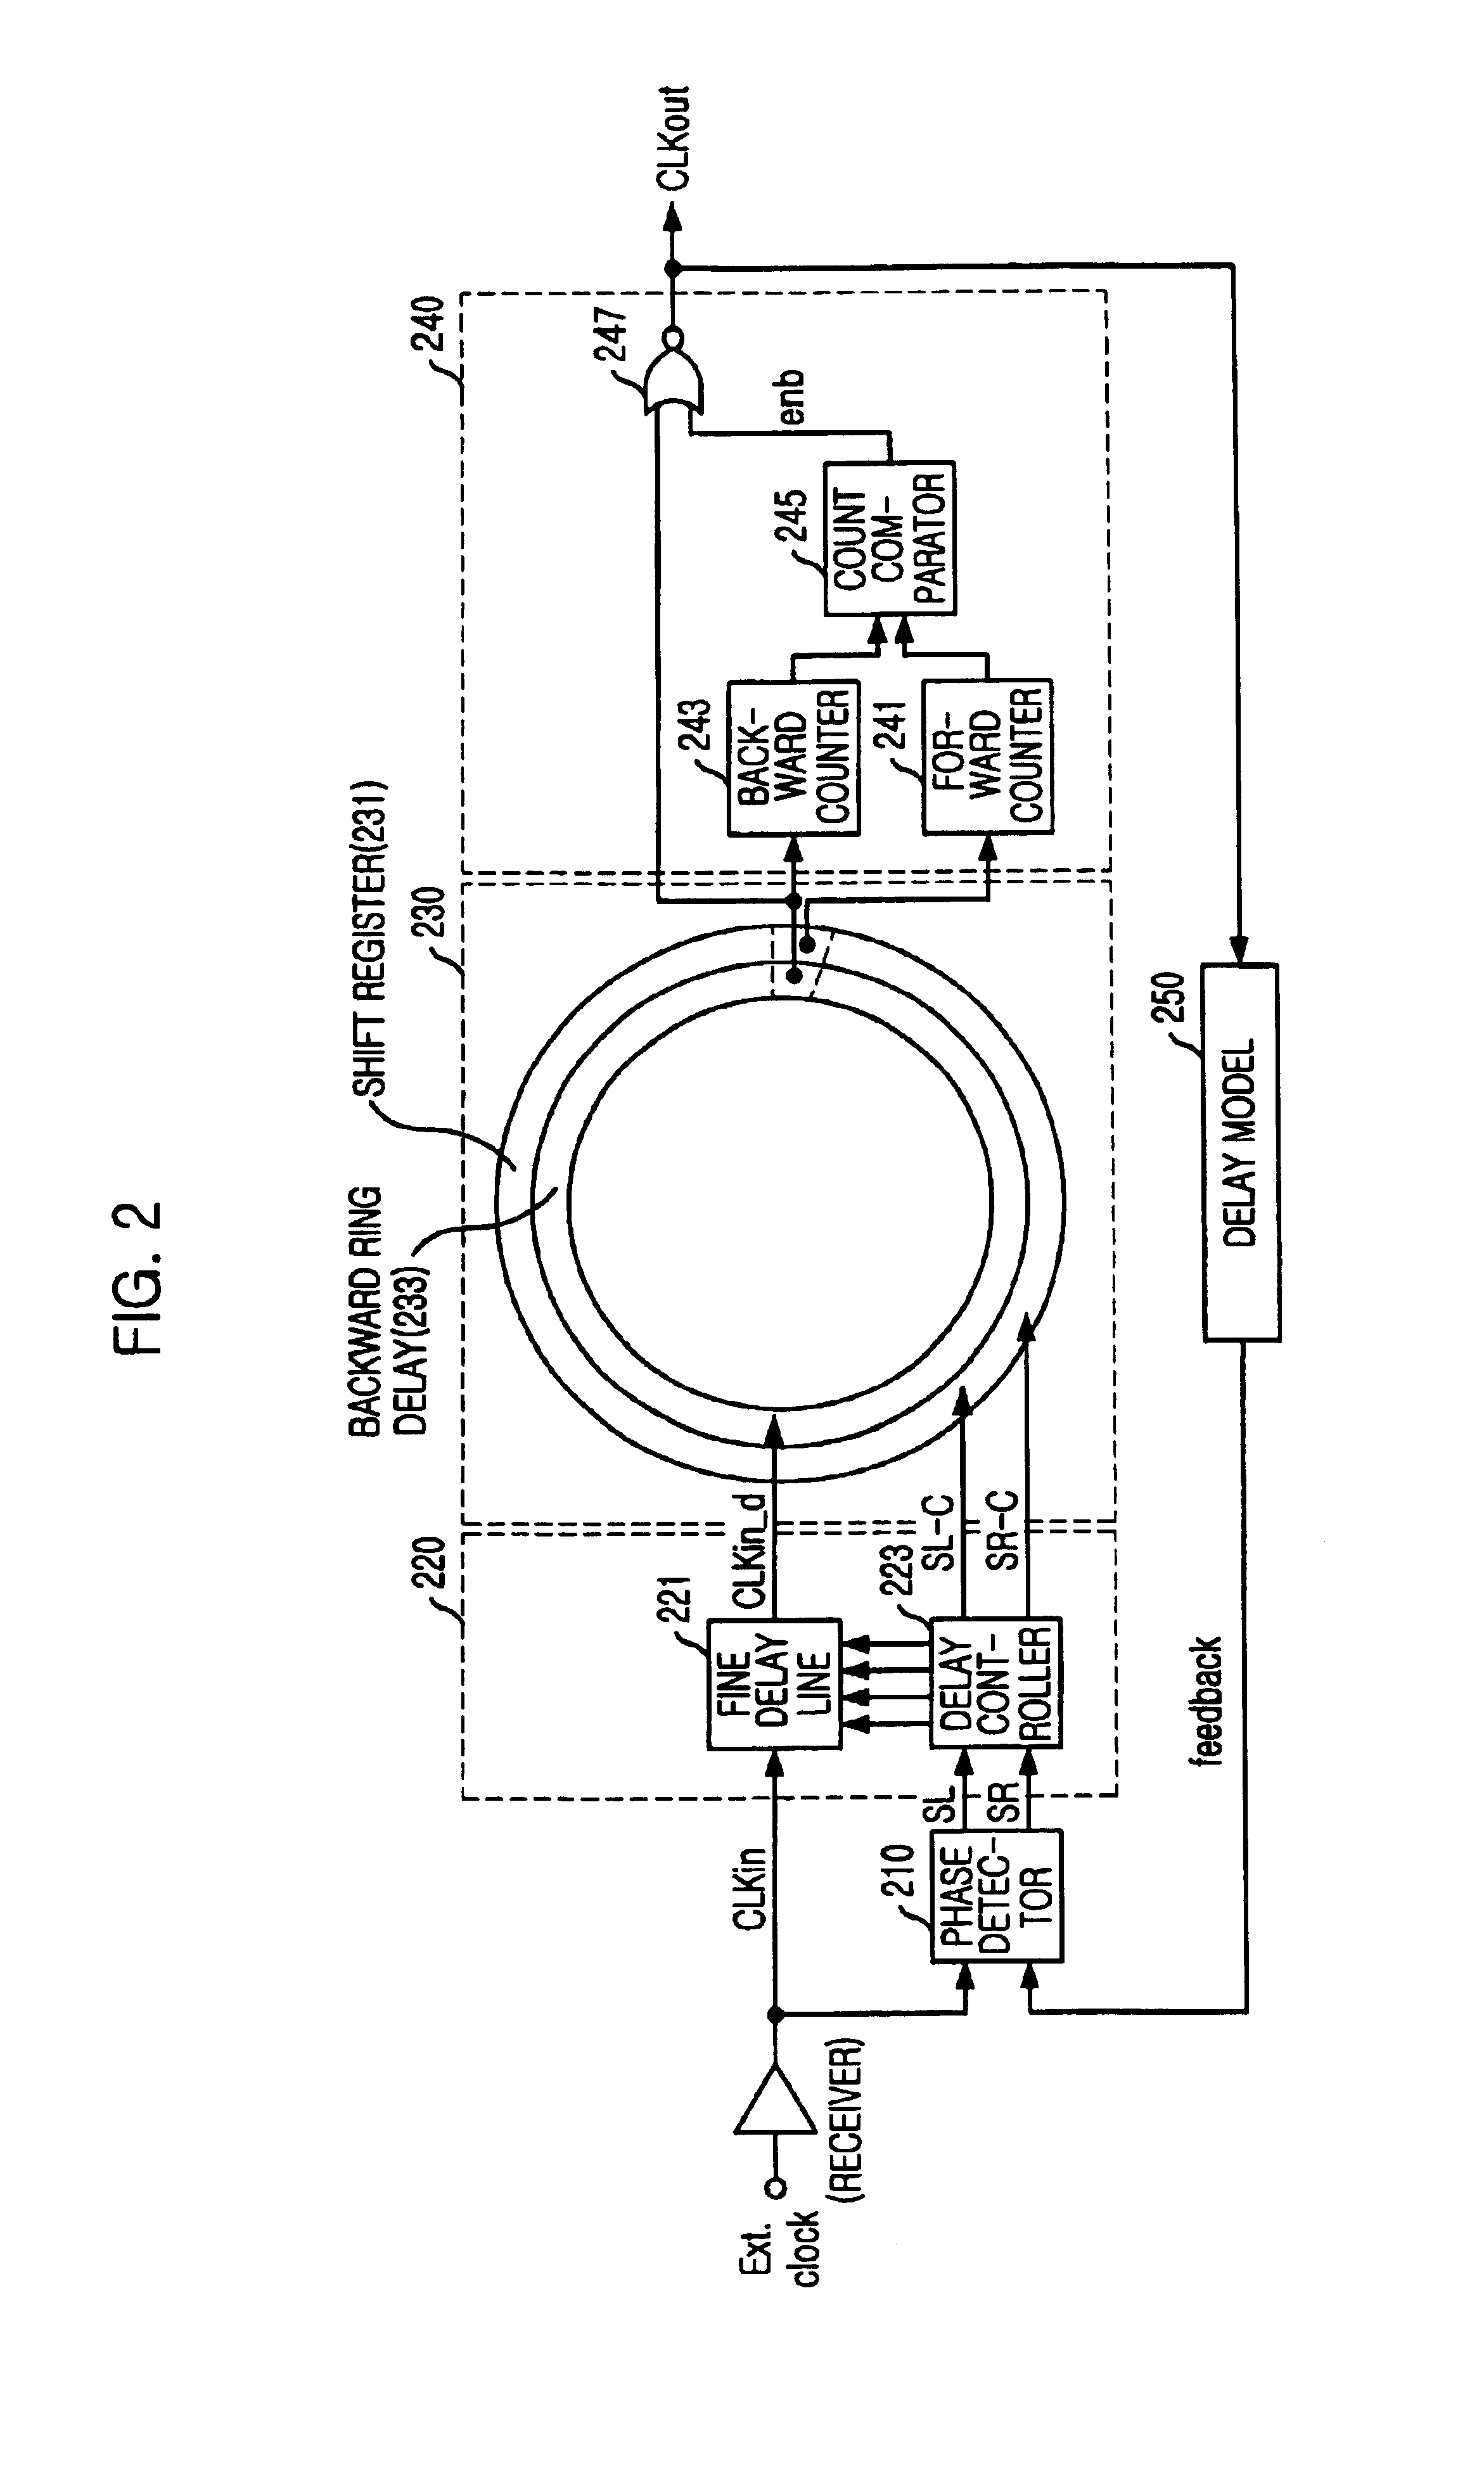 Ring-resister controlled DLL with fine delay line and direct skew sensing detector